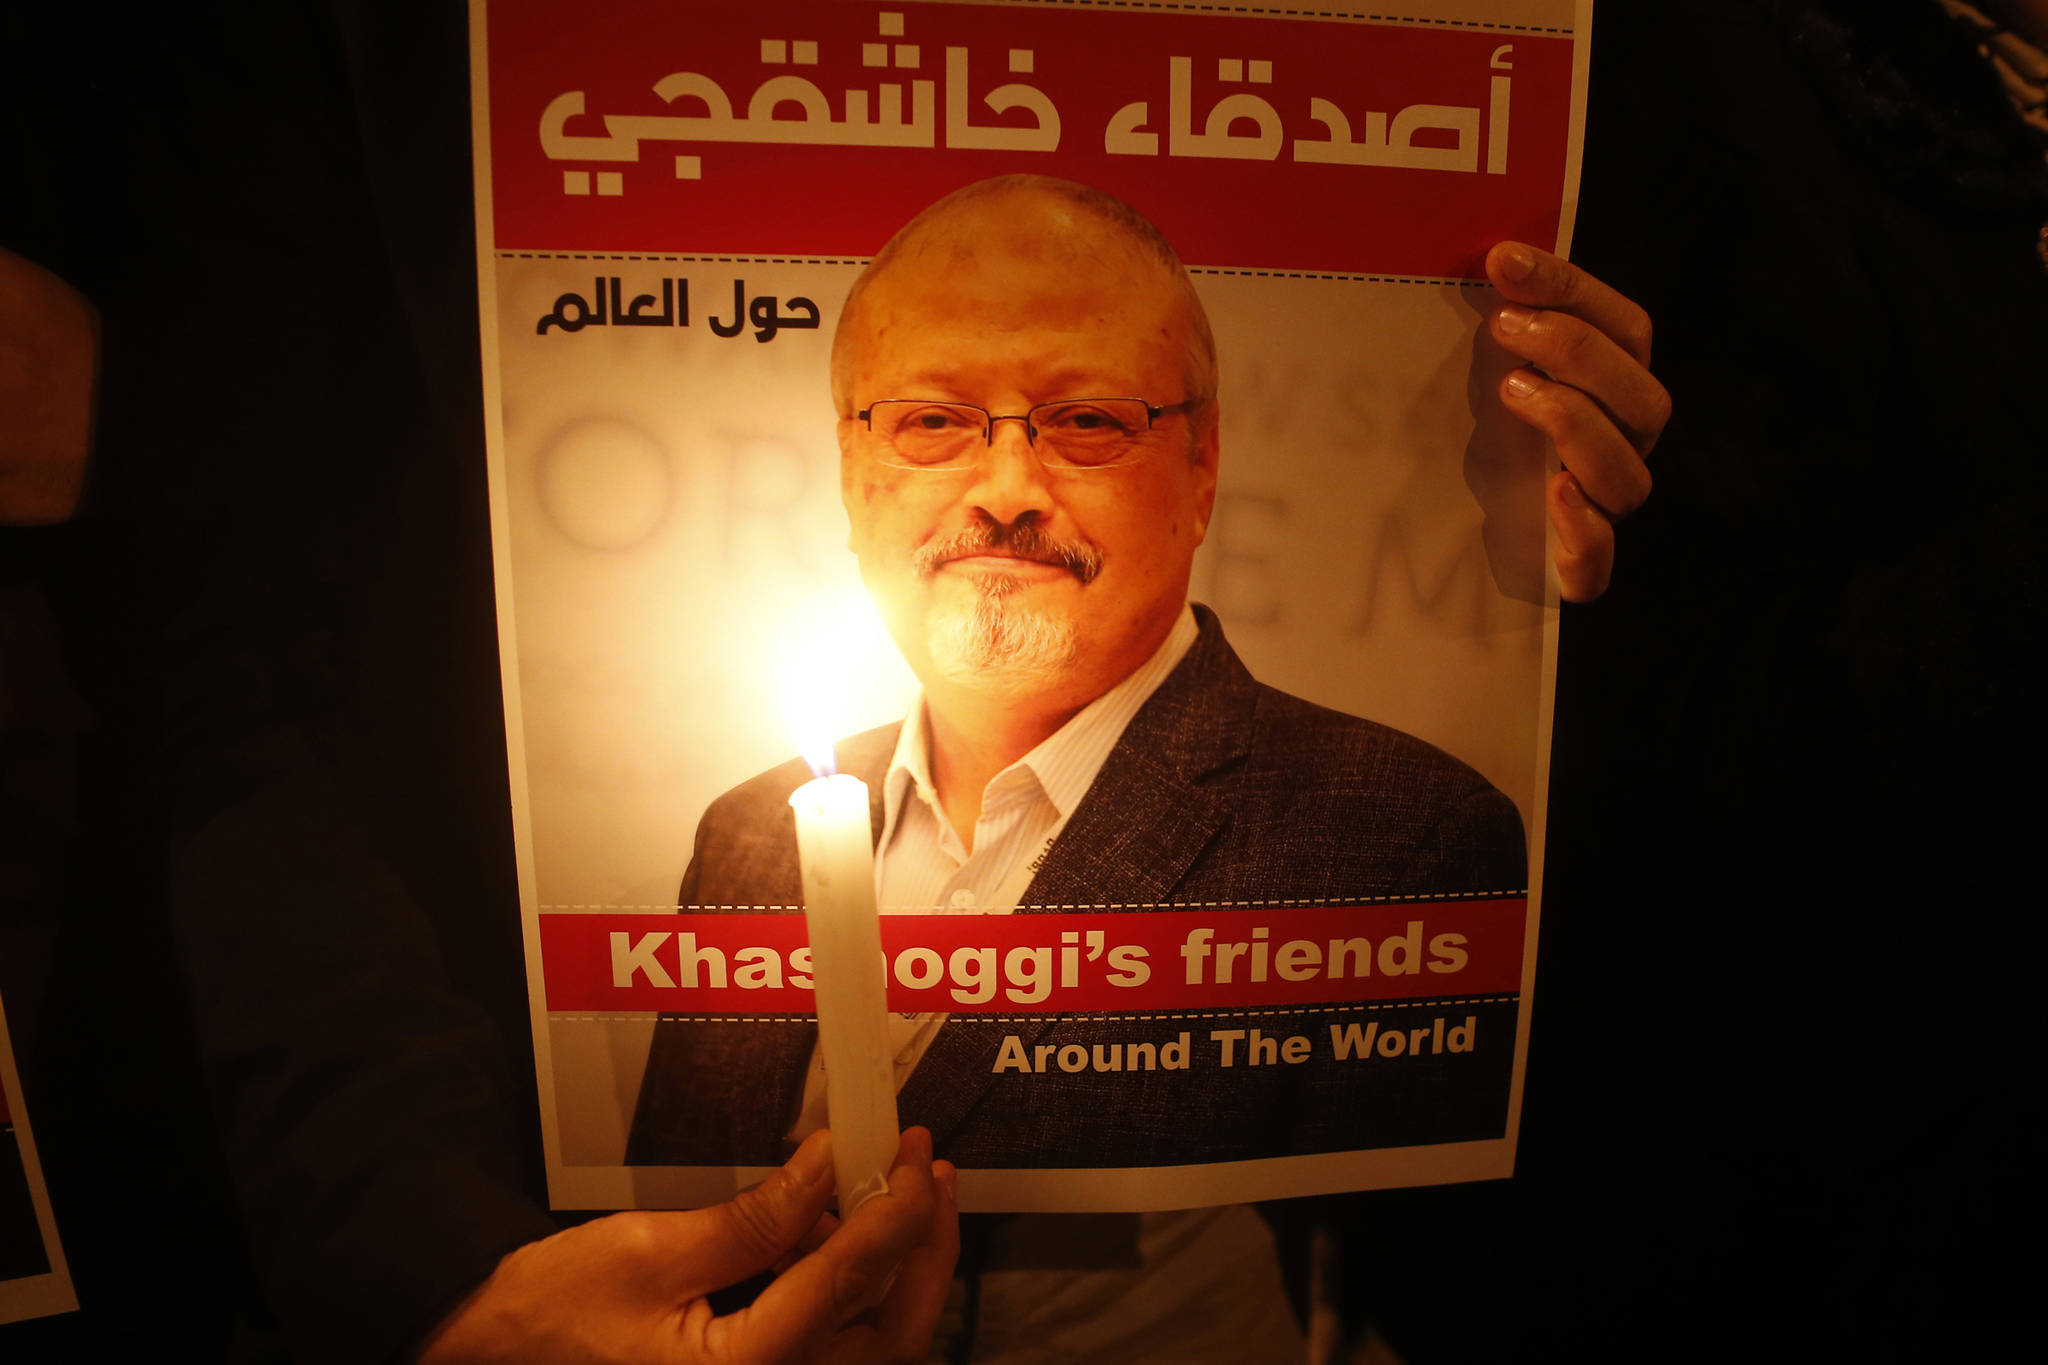 Activists, protesting the killing of Saudi journalist Jamal Khashoggi, hold a candlelight vigil outside Saudi Arabia’s consulate in Istanbul, Thursday, Oct. 25, 2018. The poster reads in Arabic:’ Khashoggi’s Friends Around the World’. A group of Arab and international public, political and media figures are establishing a global association called “Khashoggi’s Friends Around the World”; “to achieve justice for the freedom martyr”.(AP Photo/Lefteris Pitarakis)